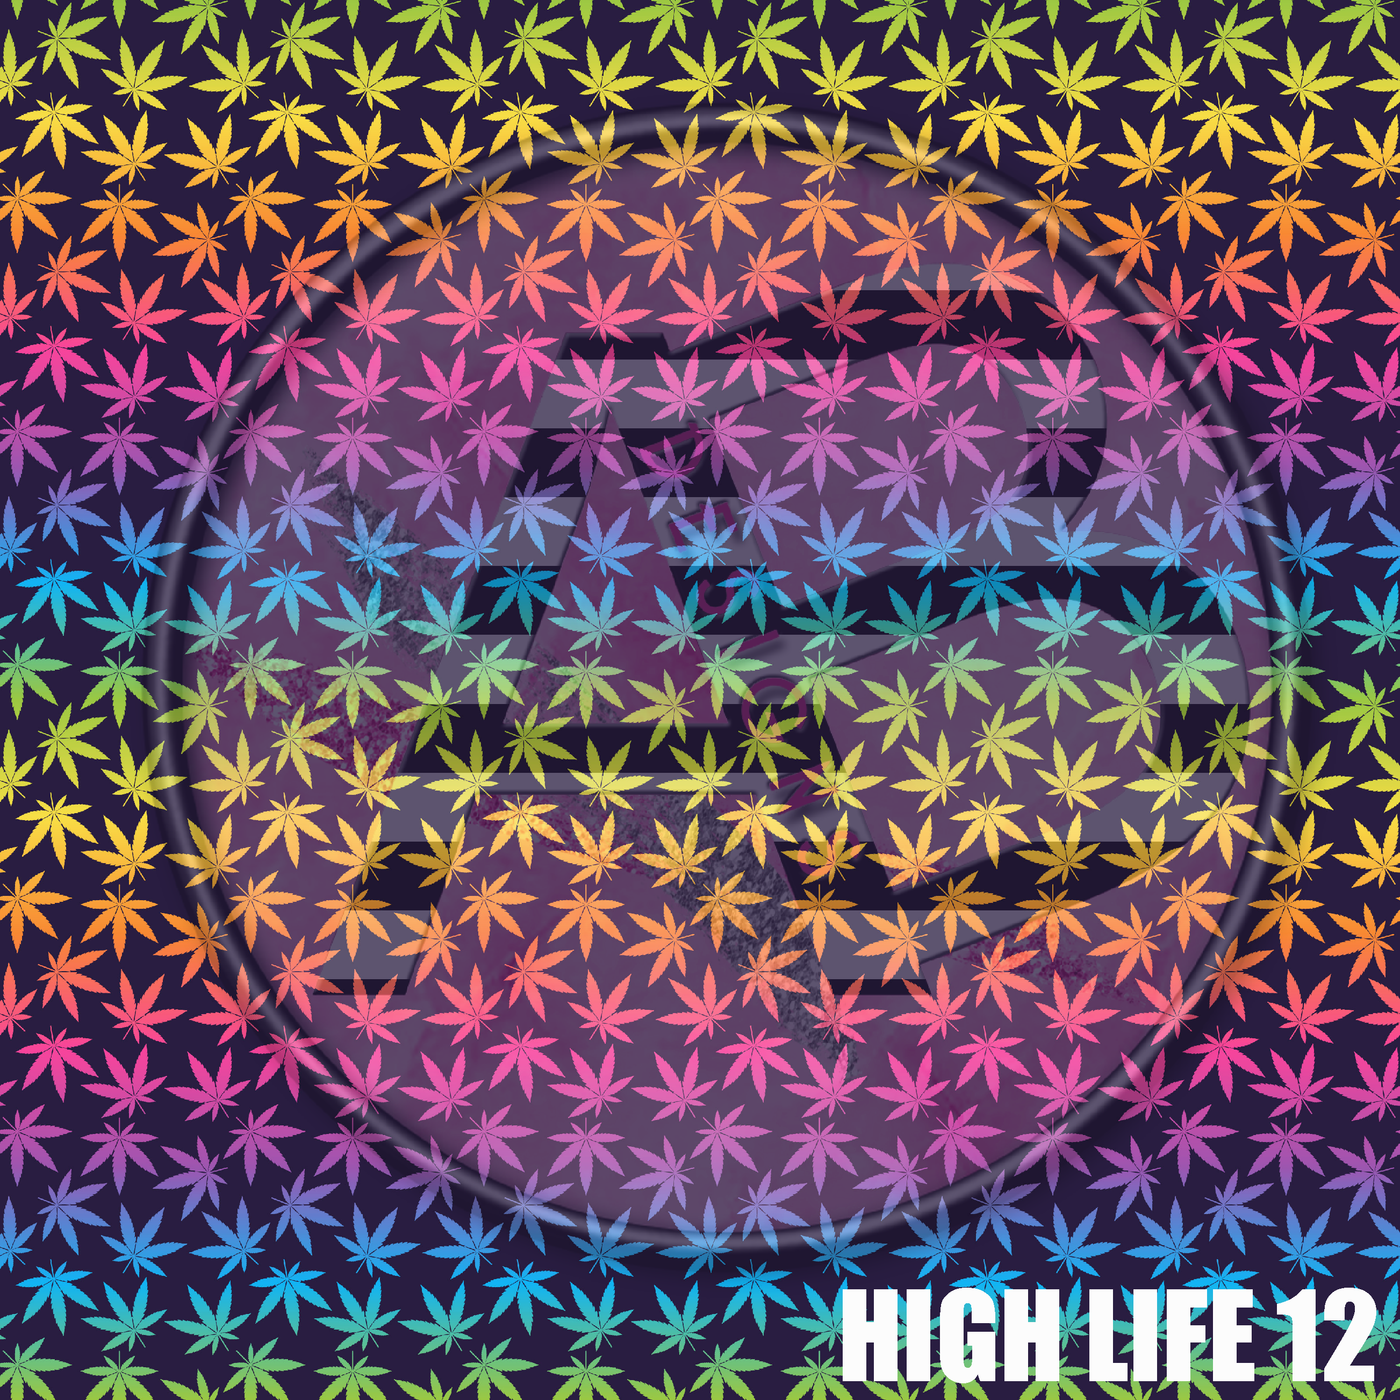 Adhesive Patterned Vinyl - High Life 12